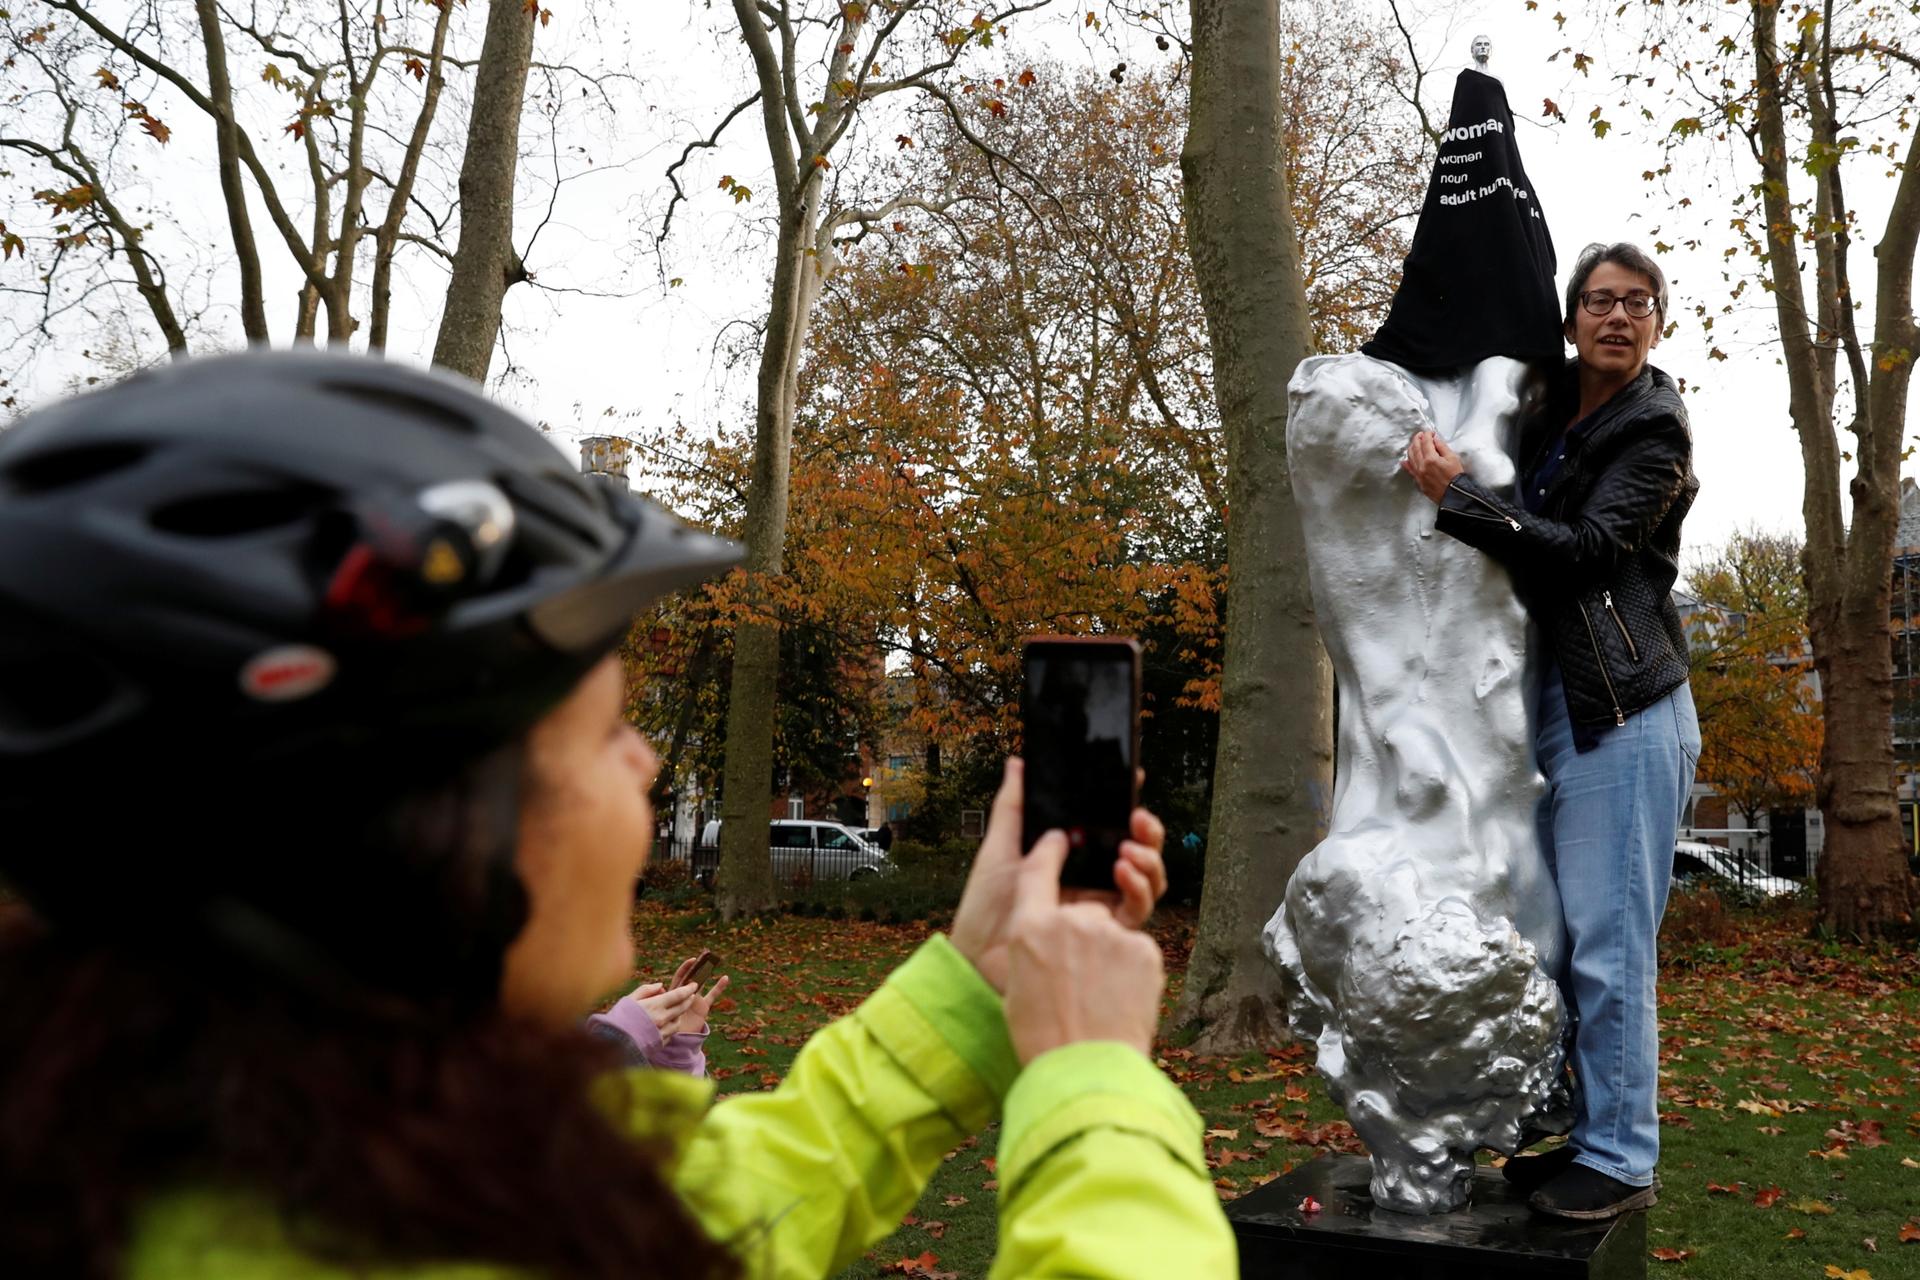 A protester covers with a T-shirt the Mary Wollstonecraft statue by artist Maggi Hambling, in Newington Green, London, Britain, Nov. 11, 2020. 